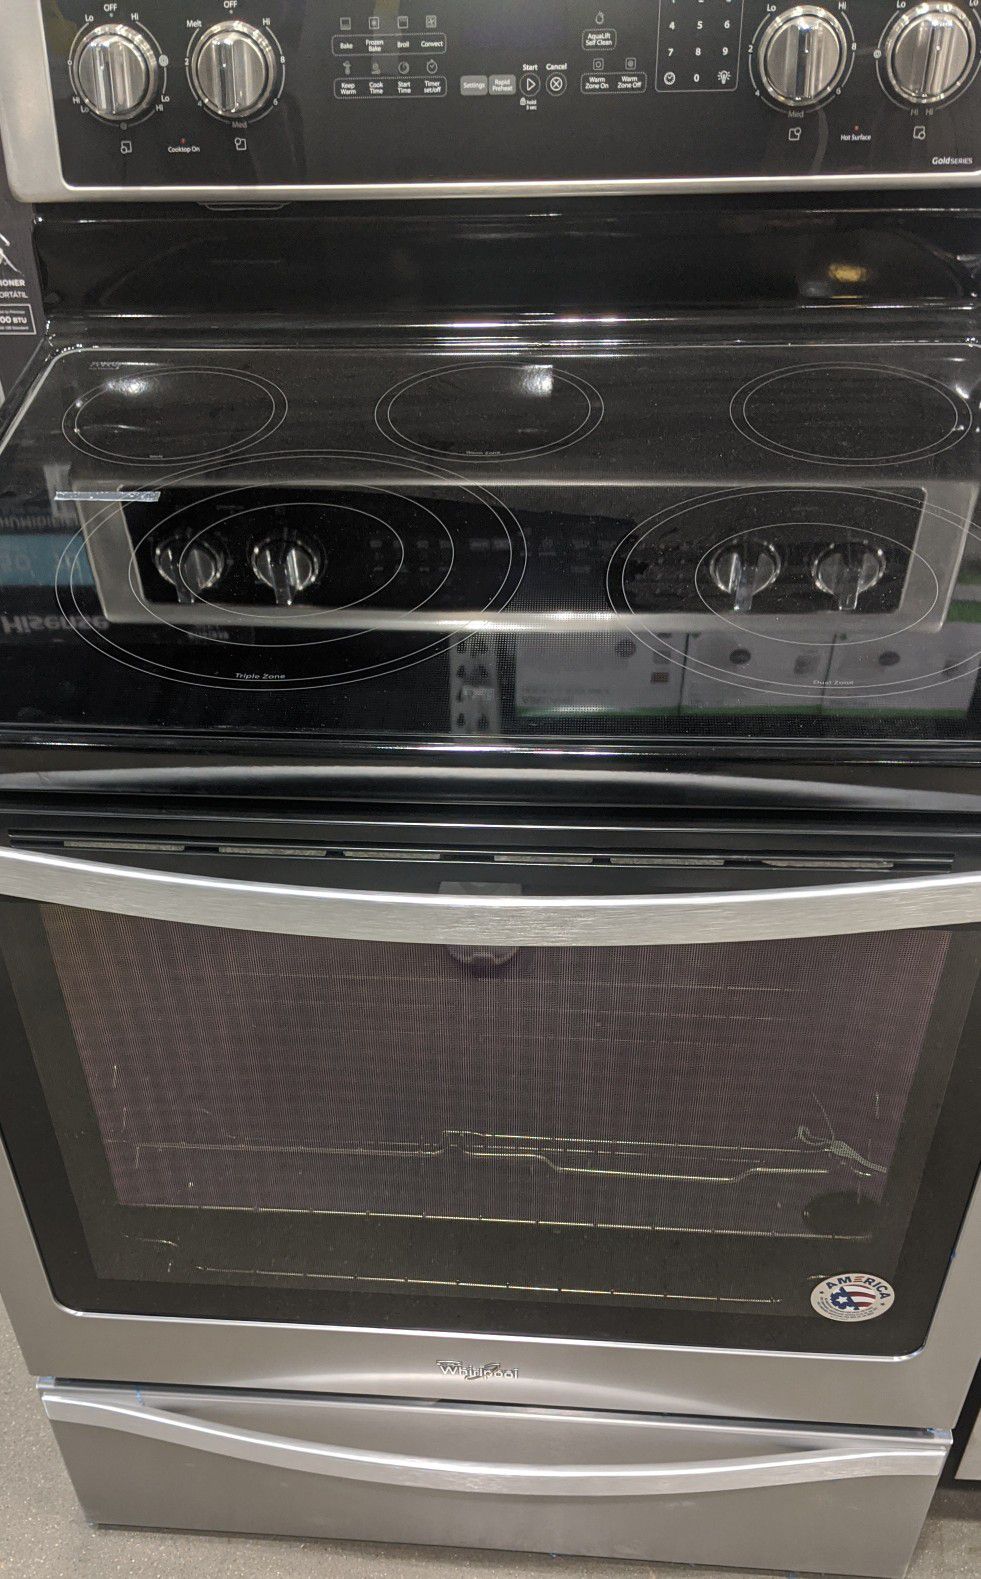 New Whirlpool 5 Elements Convection Electric Range Stainless Steel